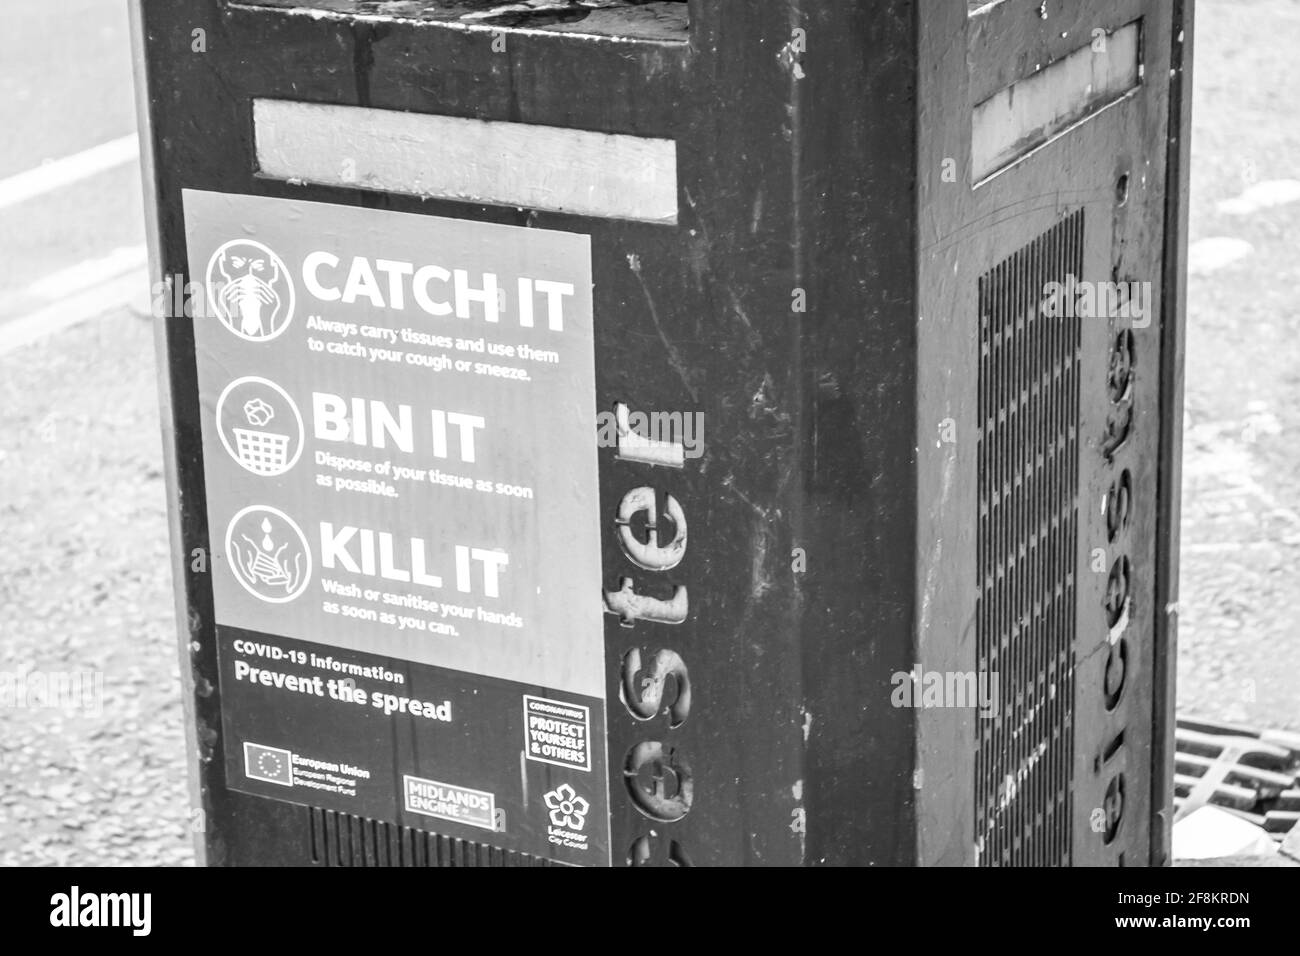 LEICESTER, ENGLAND- 3 April 2021: Litter bin in Leicester city centre with a coronavirus poster amid the pandemic Stock Photo